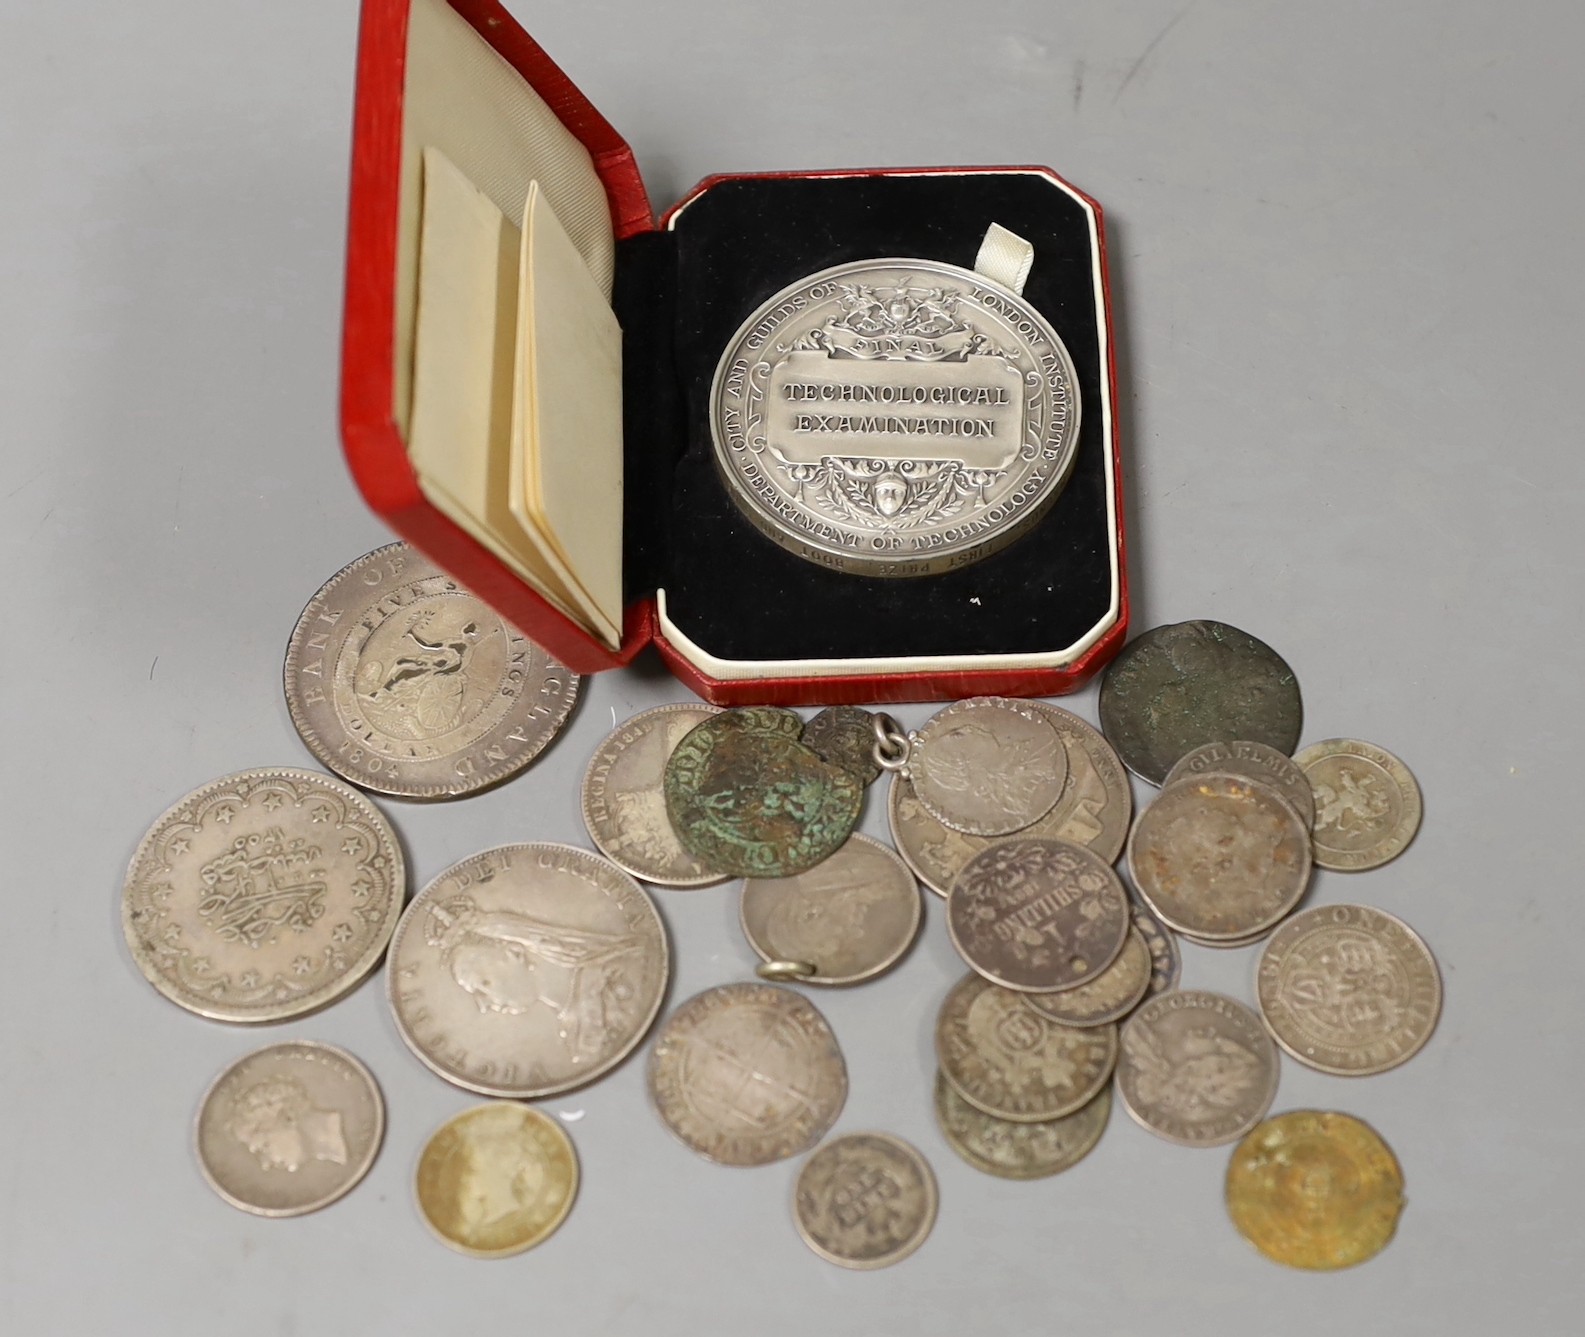 Pre 1947 silver coins and a technological examination medal stamped ‘sterling silver’ the edge stamped ‘ALFRED JOSEPH YORKE MAGNUS, FIRST PRIZE, BOOT AND SHOE MANUFACTURE, 1955’